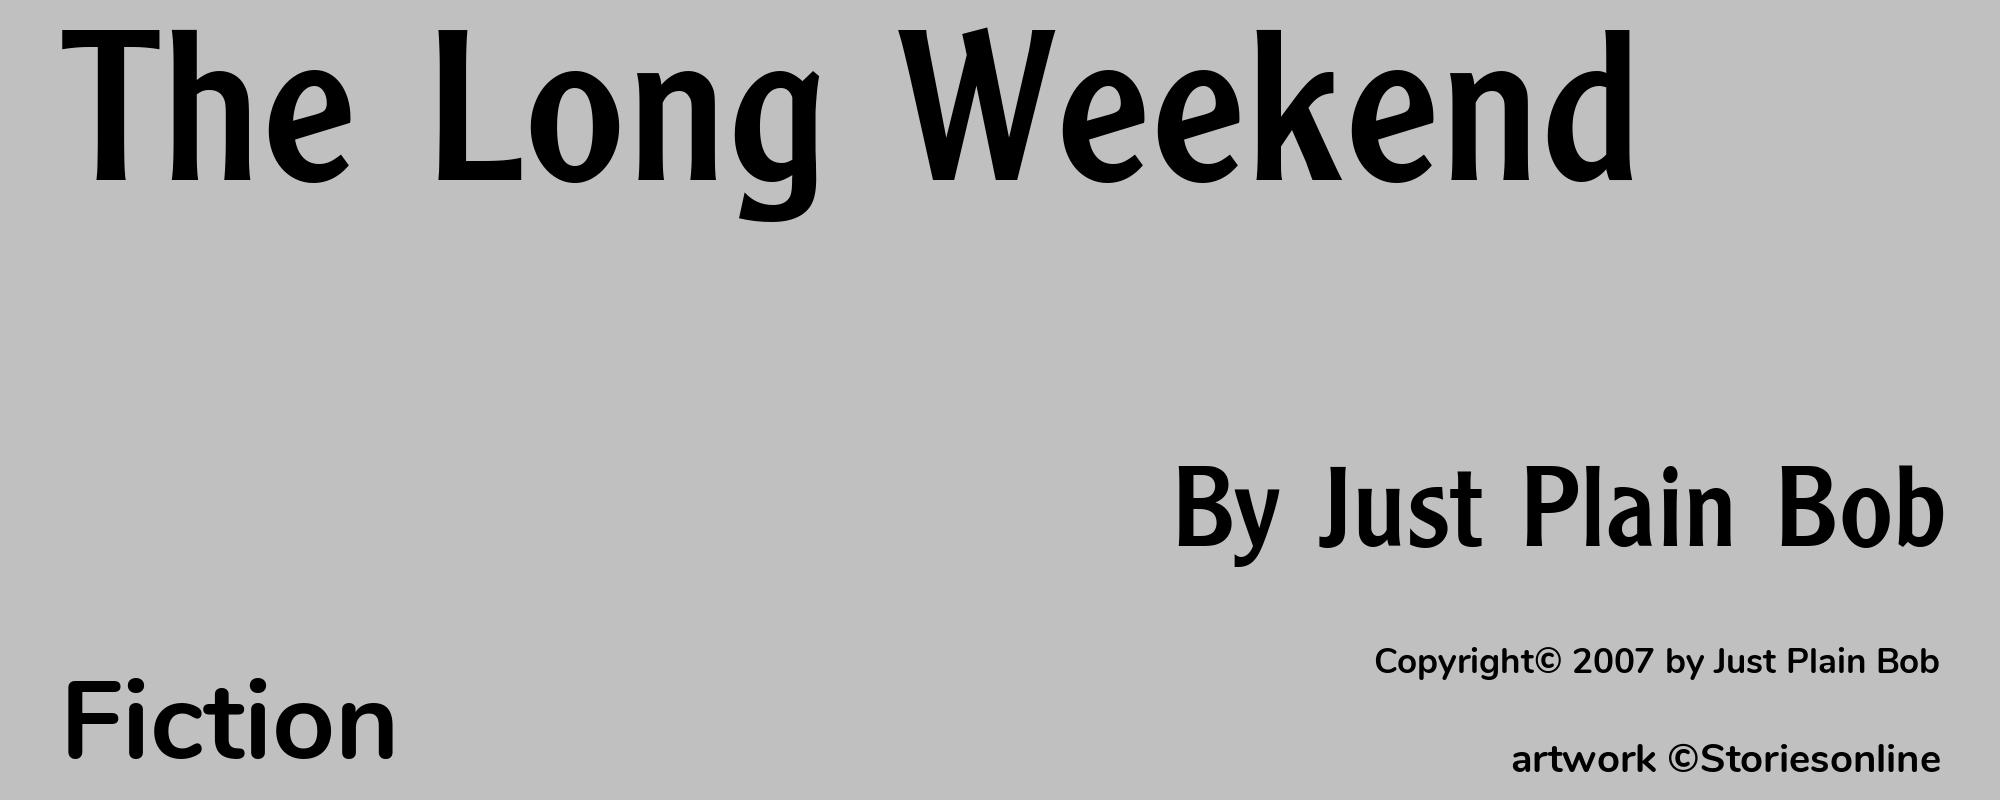 The Long Weekend - Cover